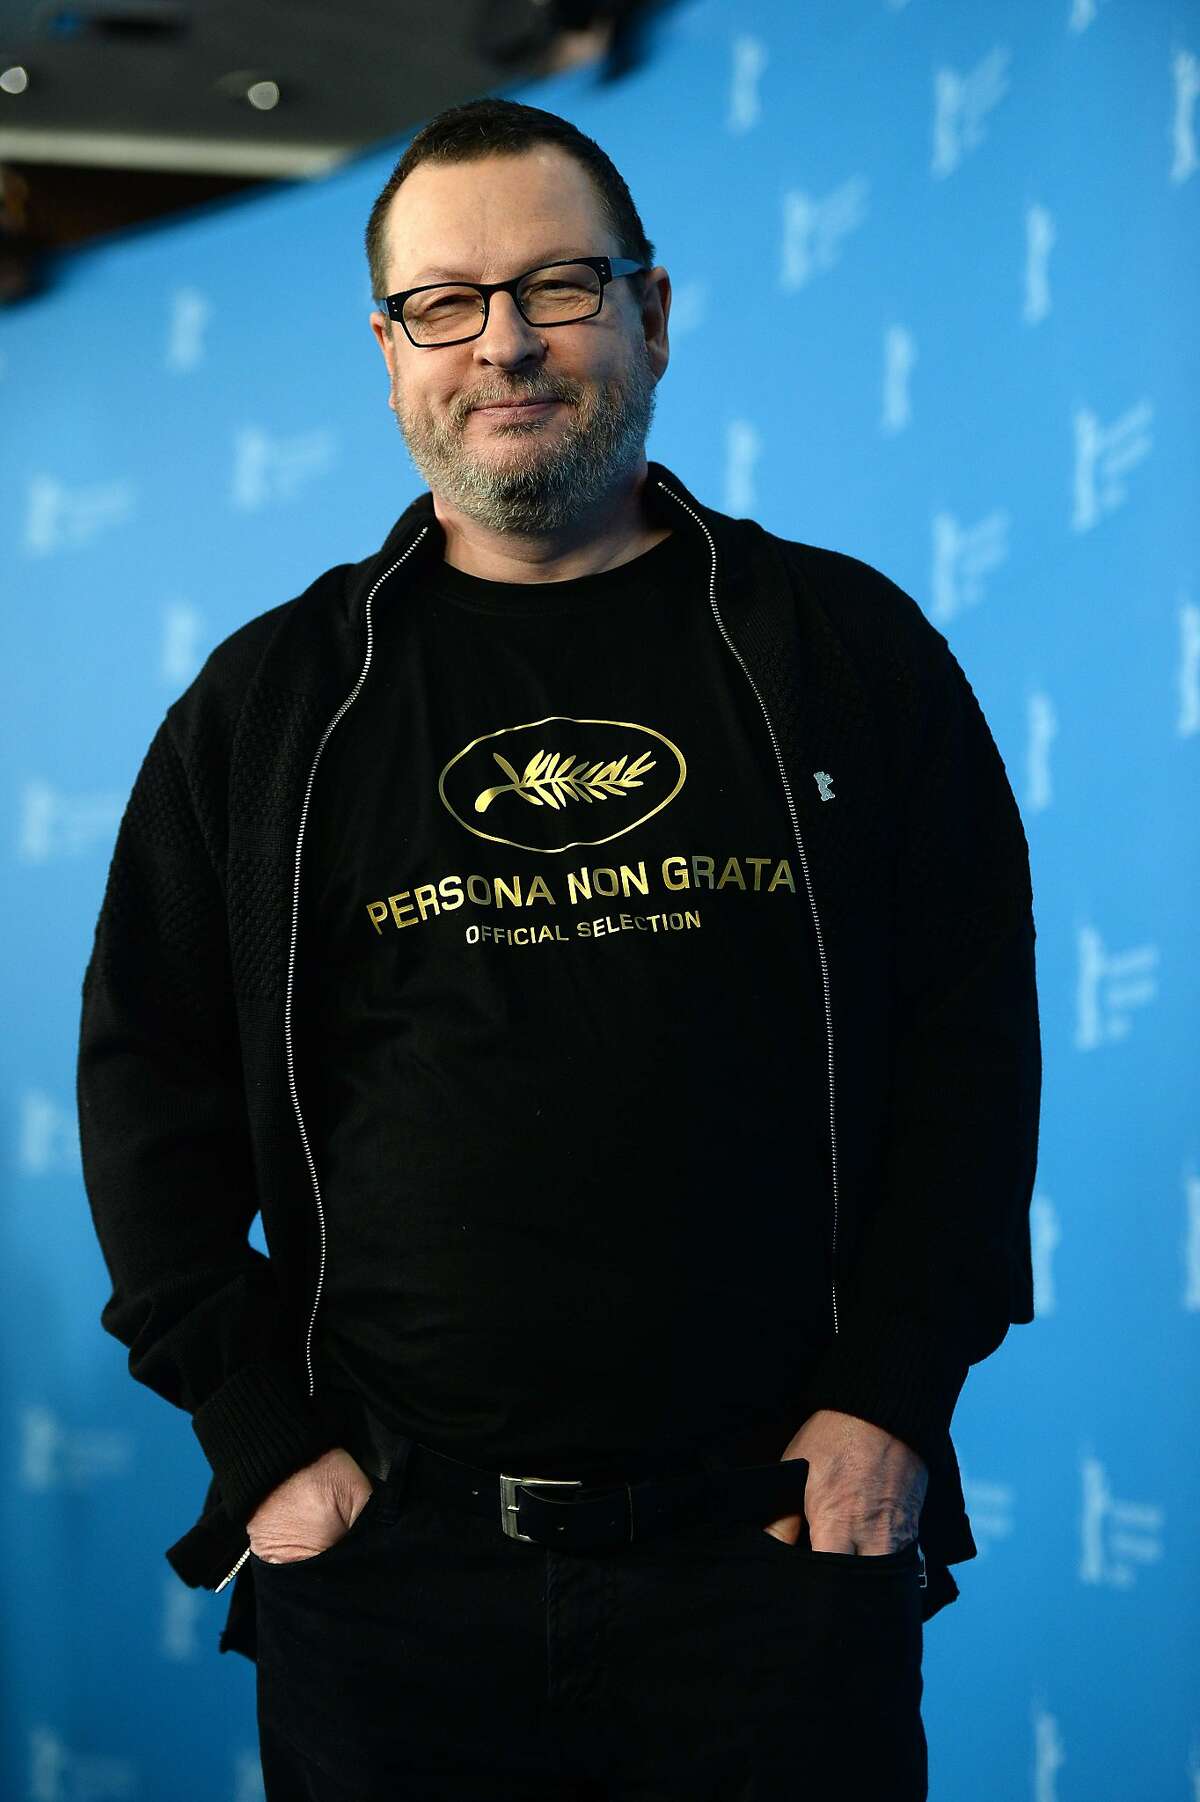 (FILES) -- A file picture taken on February 9, 2014 shows Danish director Lars von Trier posing at the photocall for his film "Nymphomaniac Volume I (Long Version)" at the 64th Berlinale Film Festival in Berlin. Turkey's Islamic-rooted government on March 4, 2014 has banned von Trier's controversial movie "Nymphomaniac" from theatres for its extensive nudity and no-holds-barred sex scenes, drawing accusations of censorship. AFP PHOTO / PATRIK STOLLARZPATRIK STOLLARZ/AFP/Getty Images